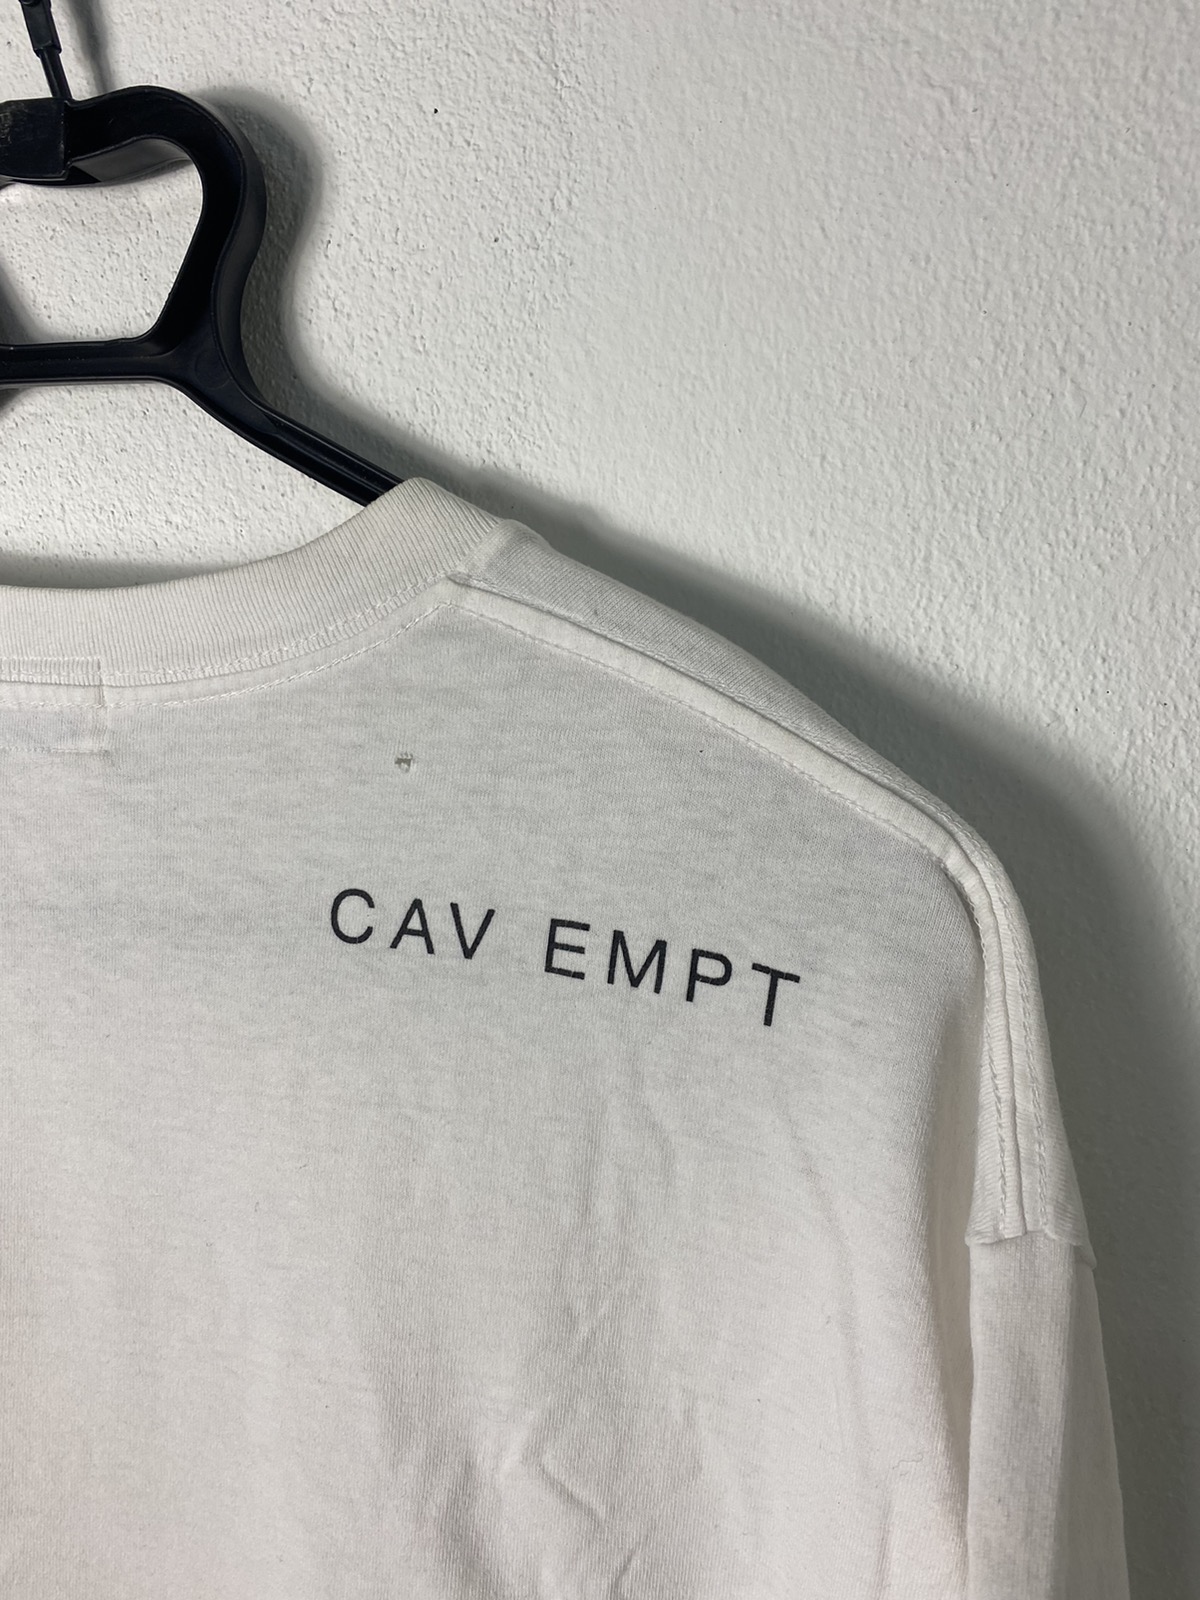 Cav Empt Mode To Cope With A Pethorical Tee - 3